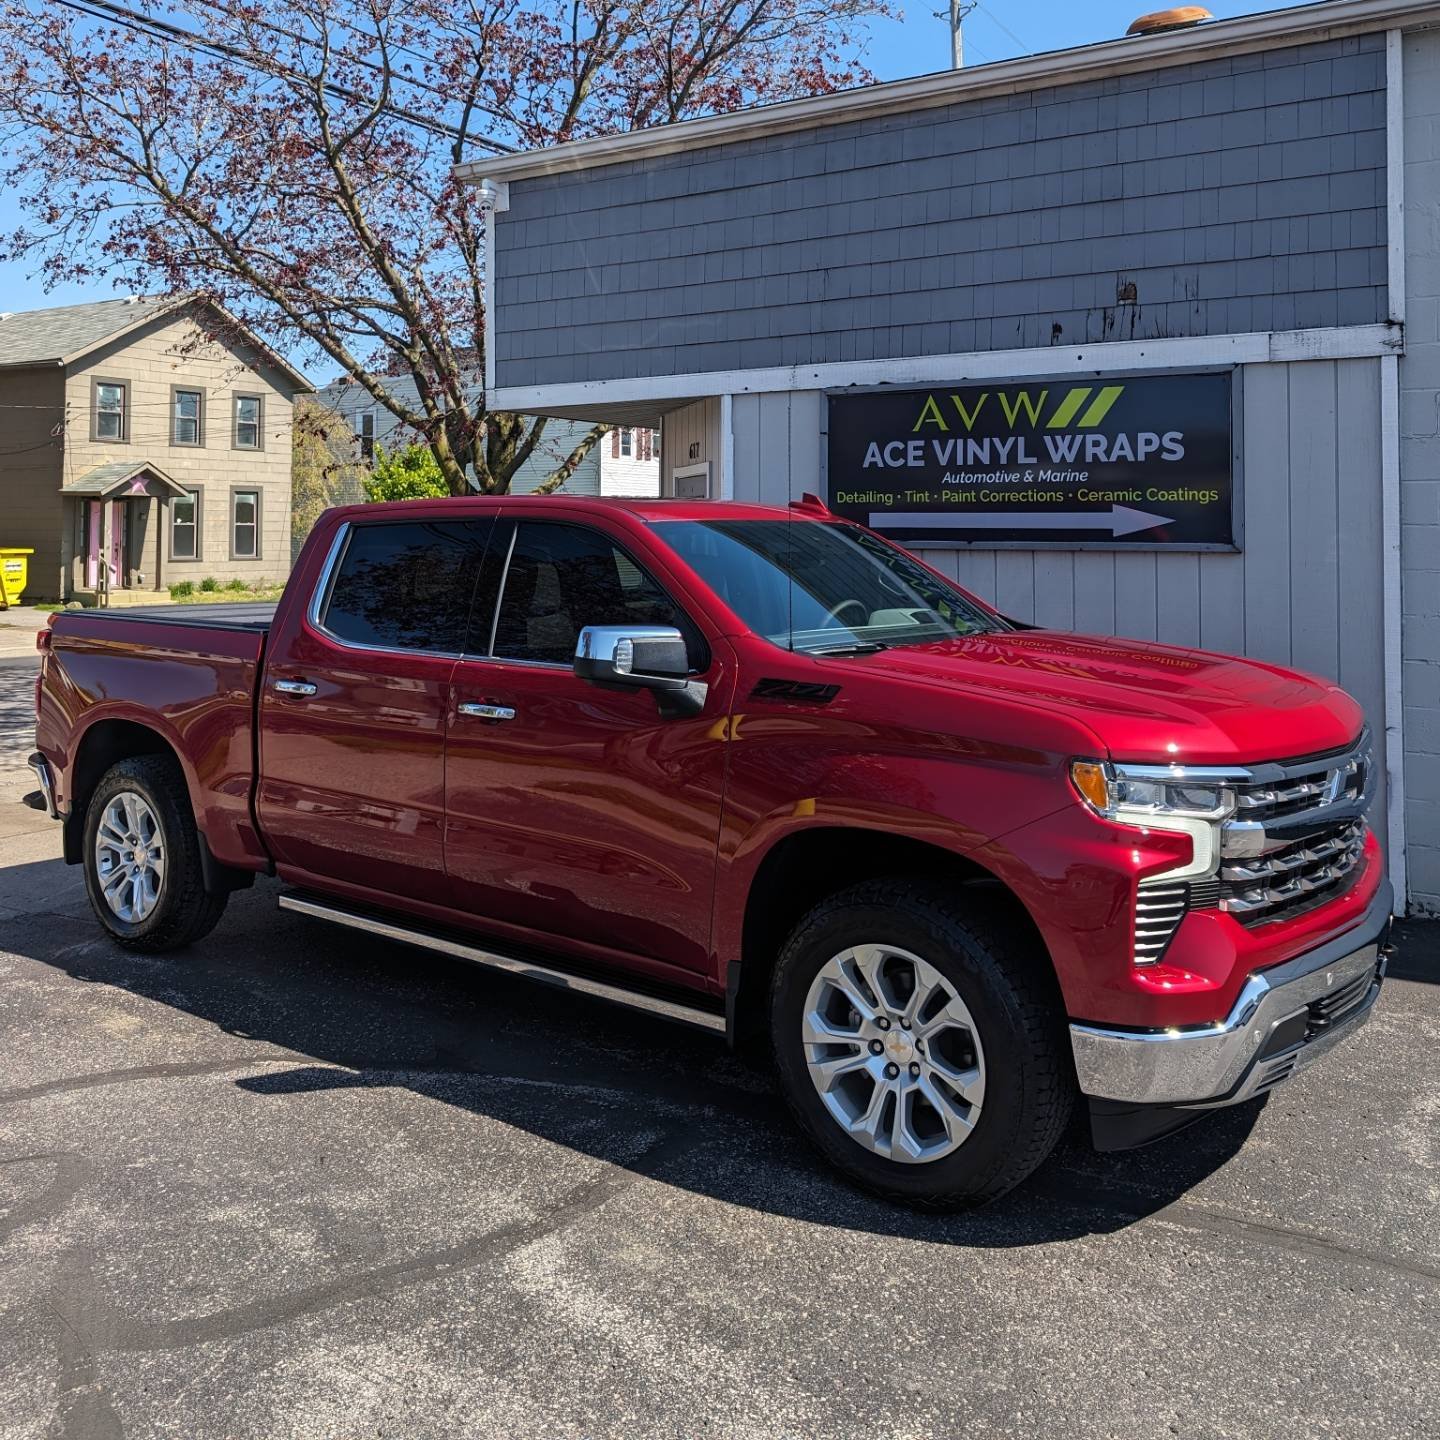 2022 Chevy Silverado was back for it's annual System X ceramic maintenance check up. Looks just as good as the day it left! 

HITEK Carbon IR 20% tint applied to roll downs as well

419-202-1513  Text OR Call us
www.acevinylwraps.com
acevinylwrapsdet